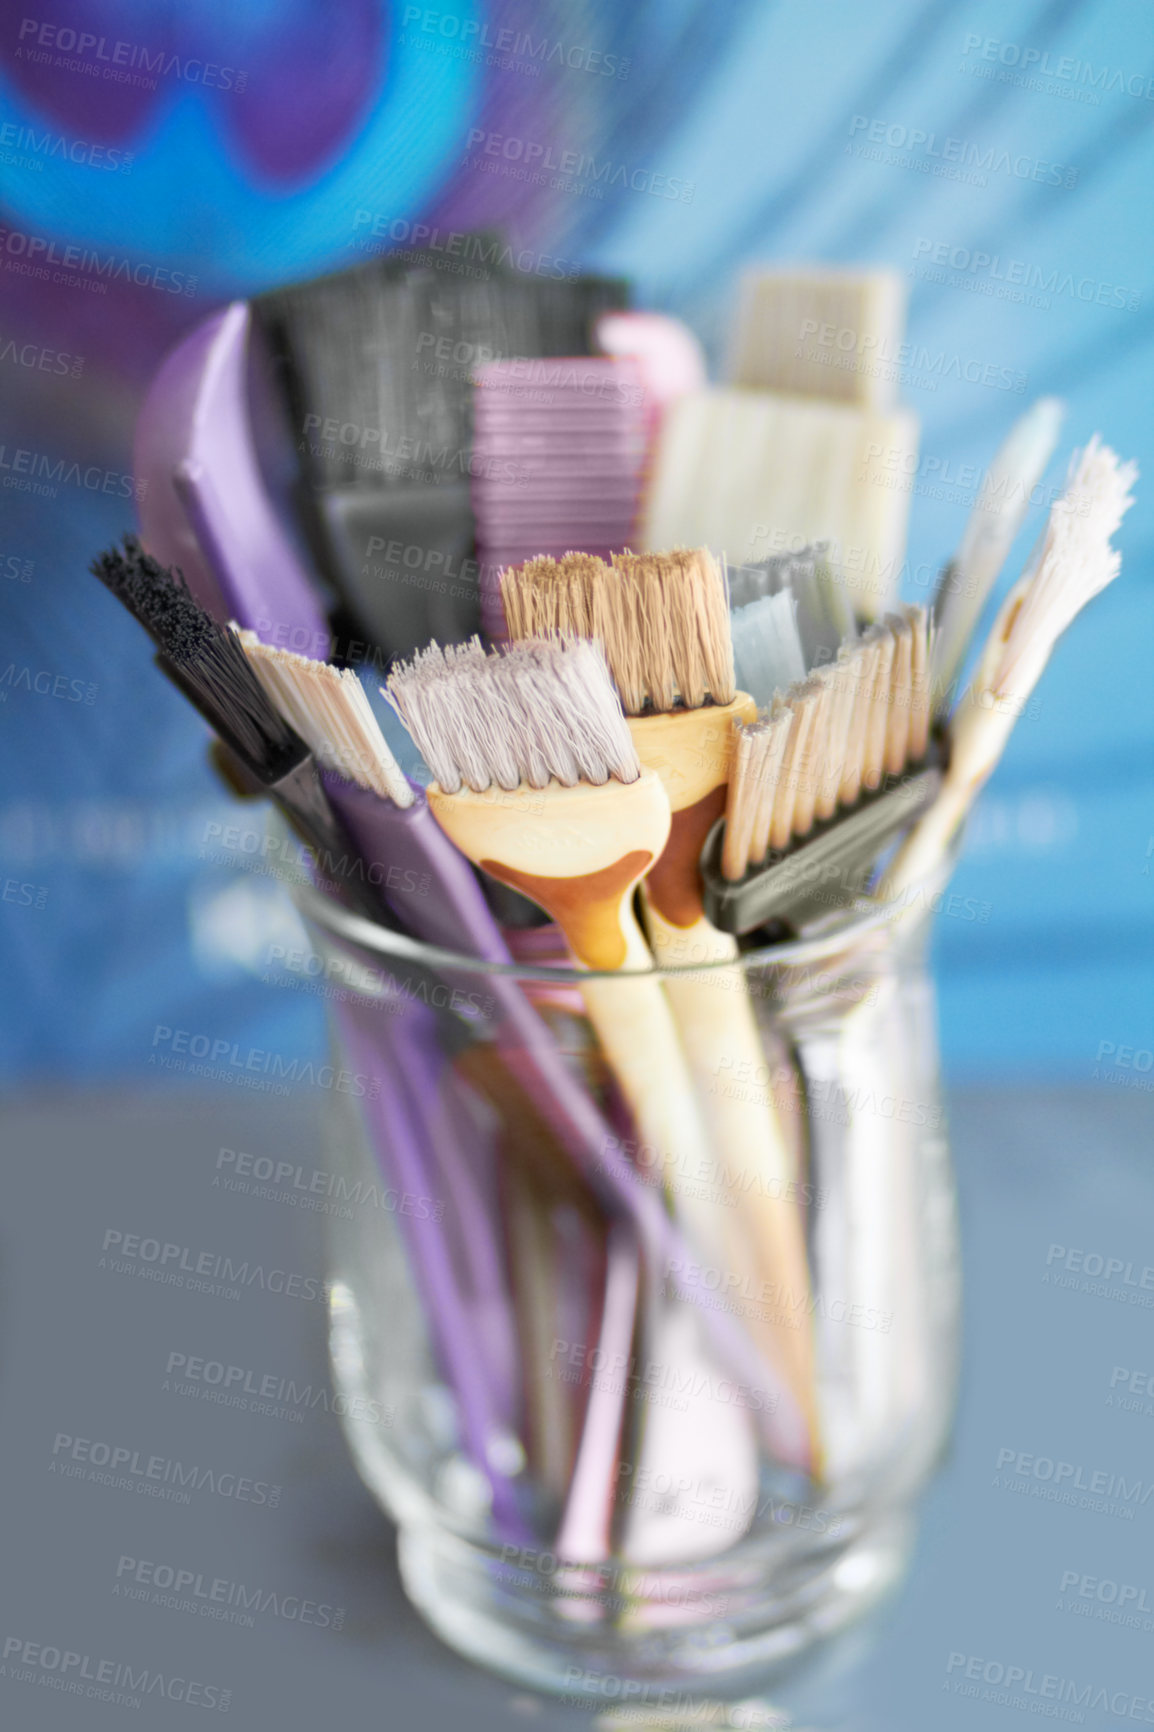 Buy stock photo A glass jar filled with hair colouring brushes